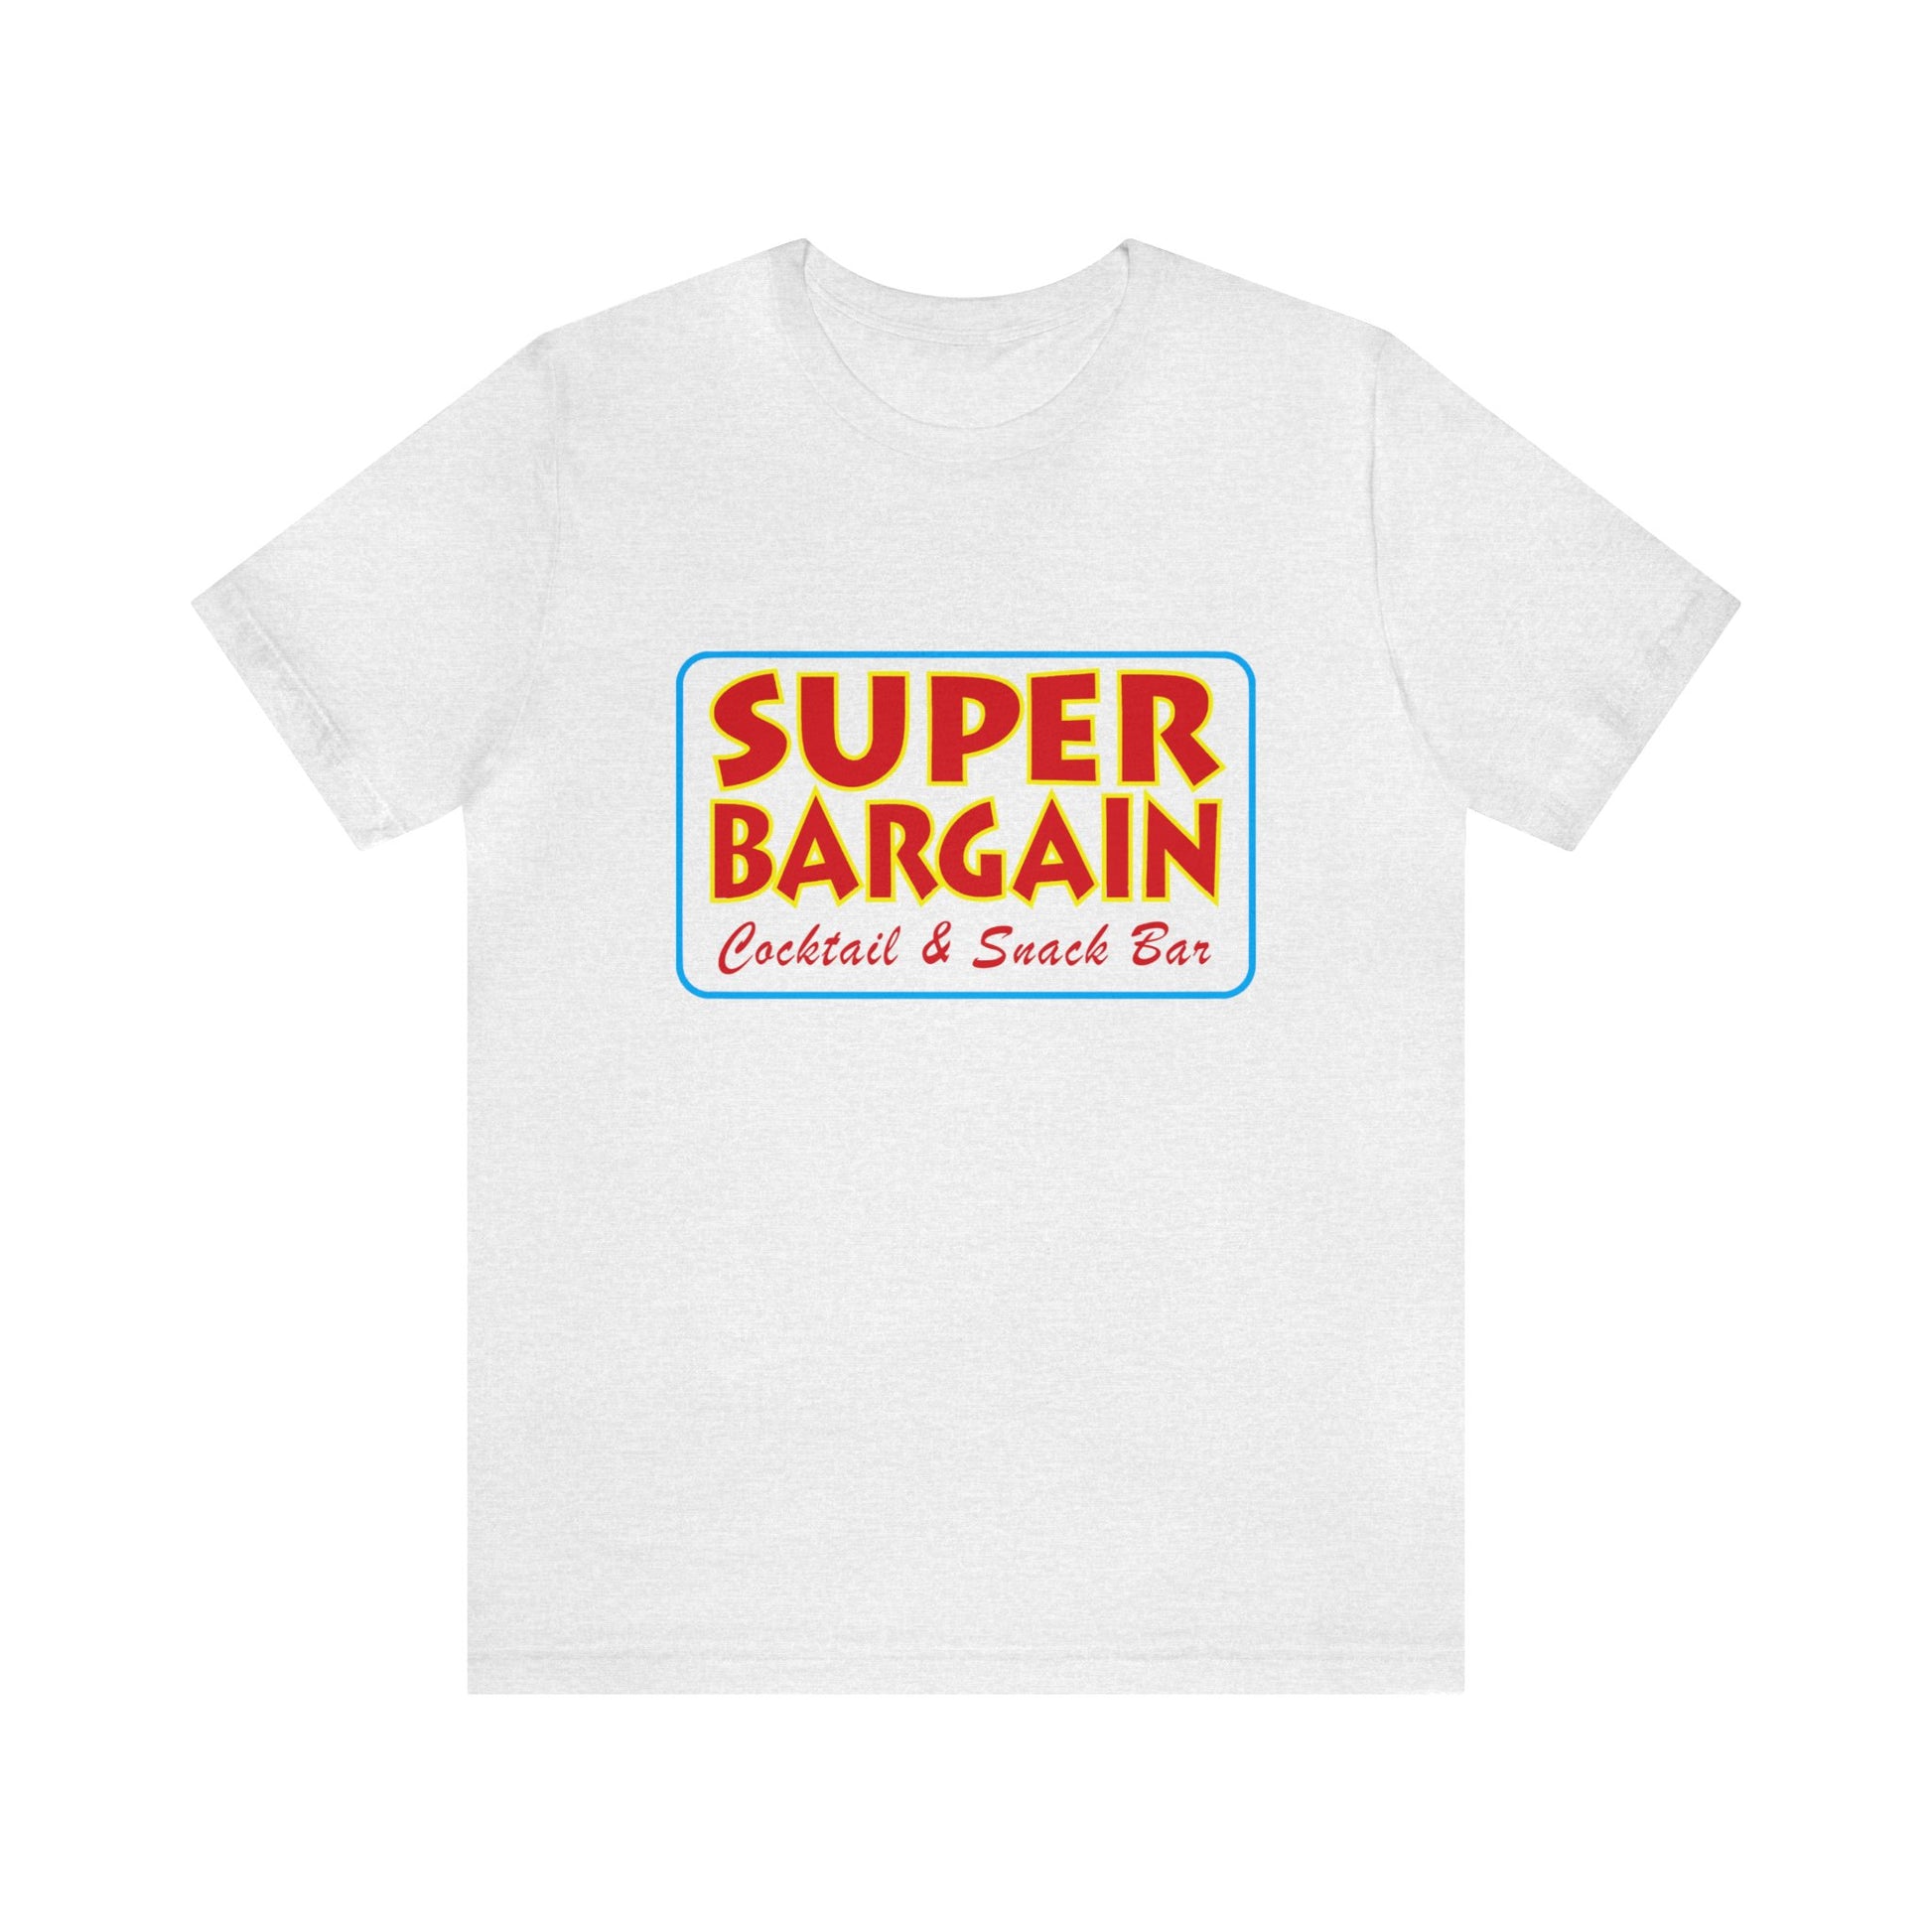 A Printify Unisex Jersey Short Sleeve Tee with a colorful logo that reads "Super Bargain Cocktail & Snack Bar, Cabbagetown" in bold red and yellow lettering, centered on the chest area.